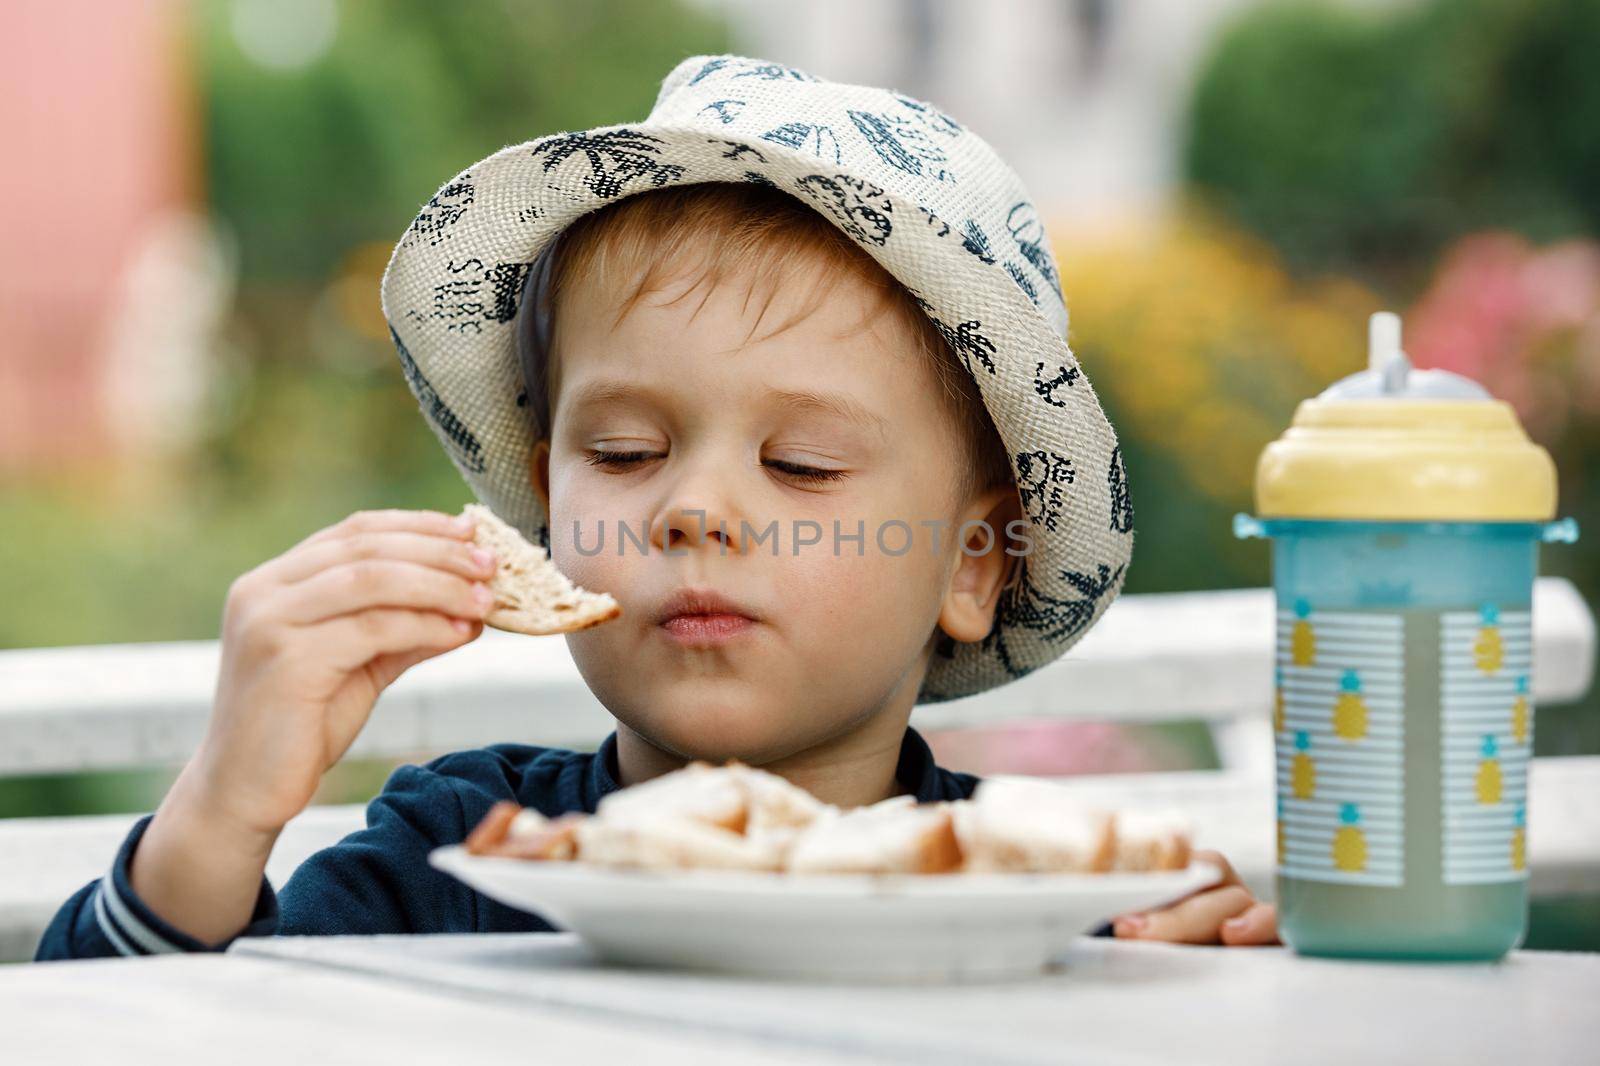 A healthy child eats butter on bread in his grandmother's garden during the summer holidays. A plastic cup with pineapple juice on the table. The concept of healthy food for a child.